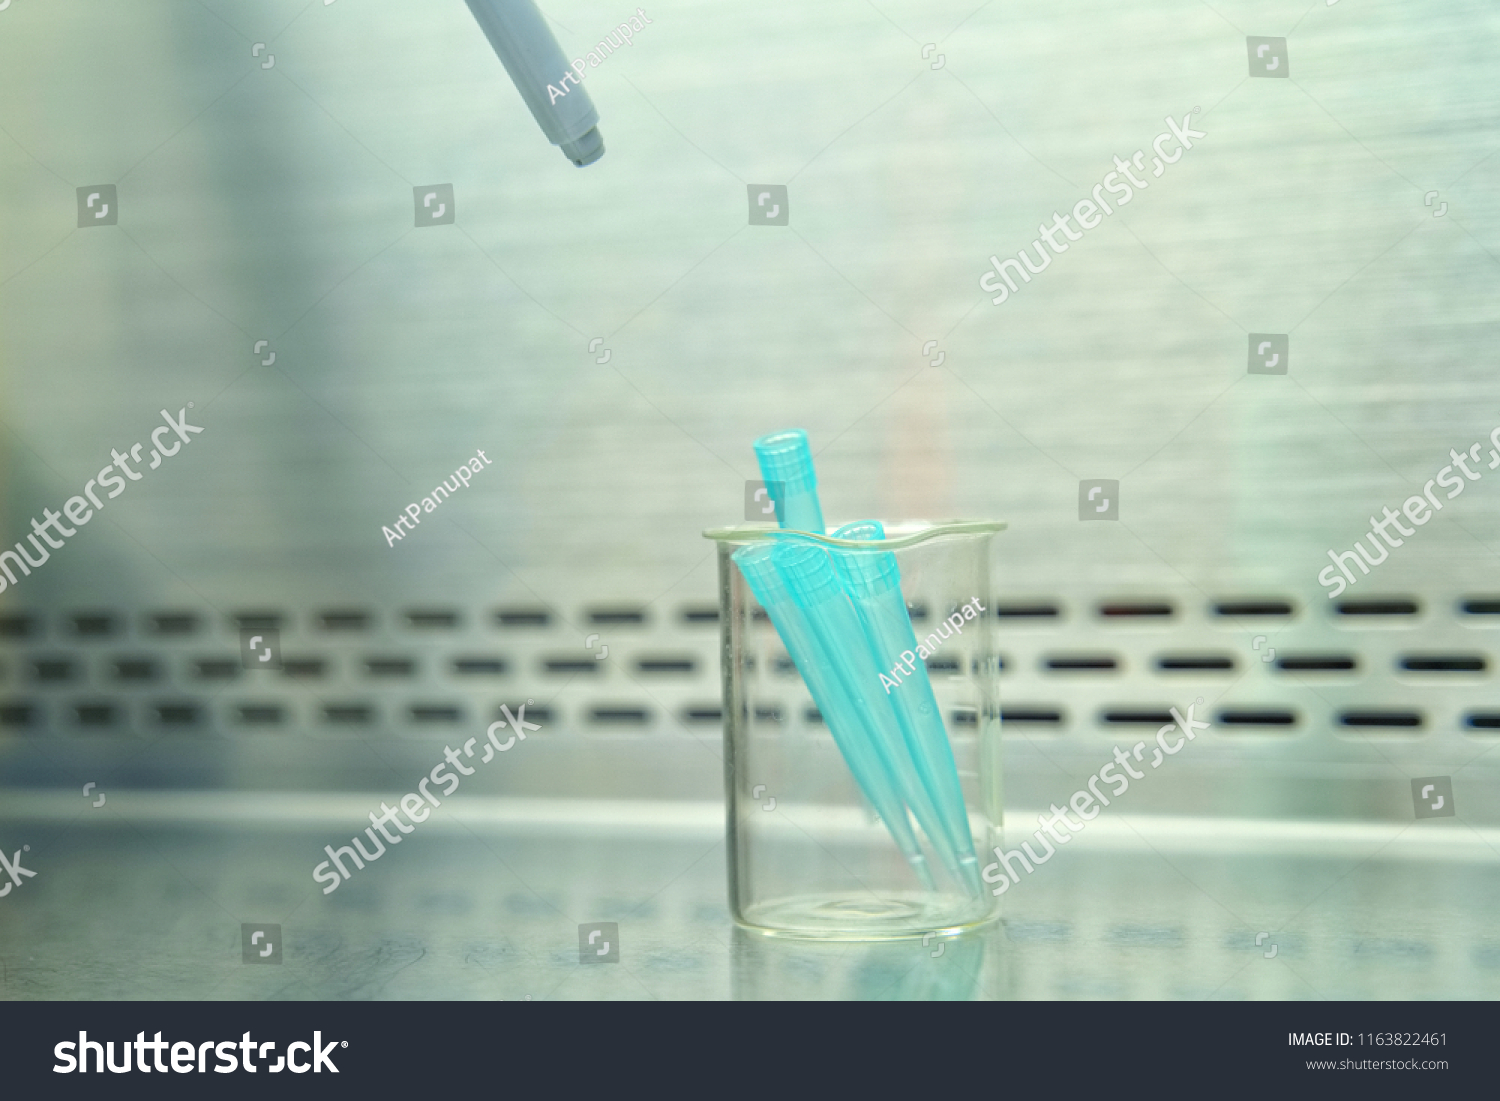 The researcher using pipette and splitting pipette tip from pipette in the lab test. #1163822461